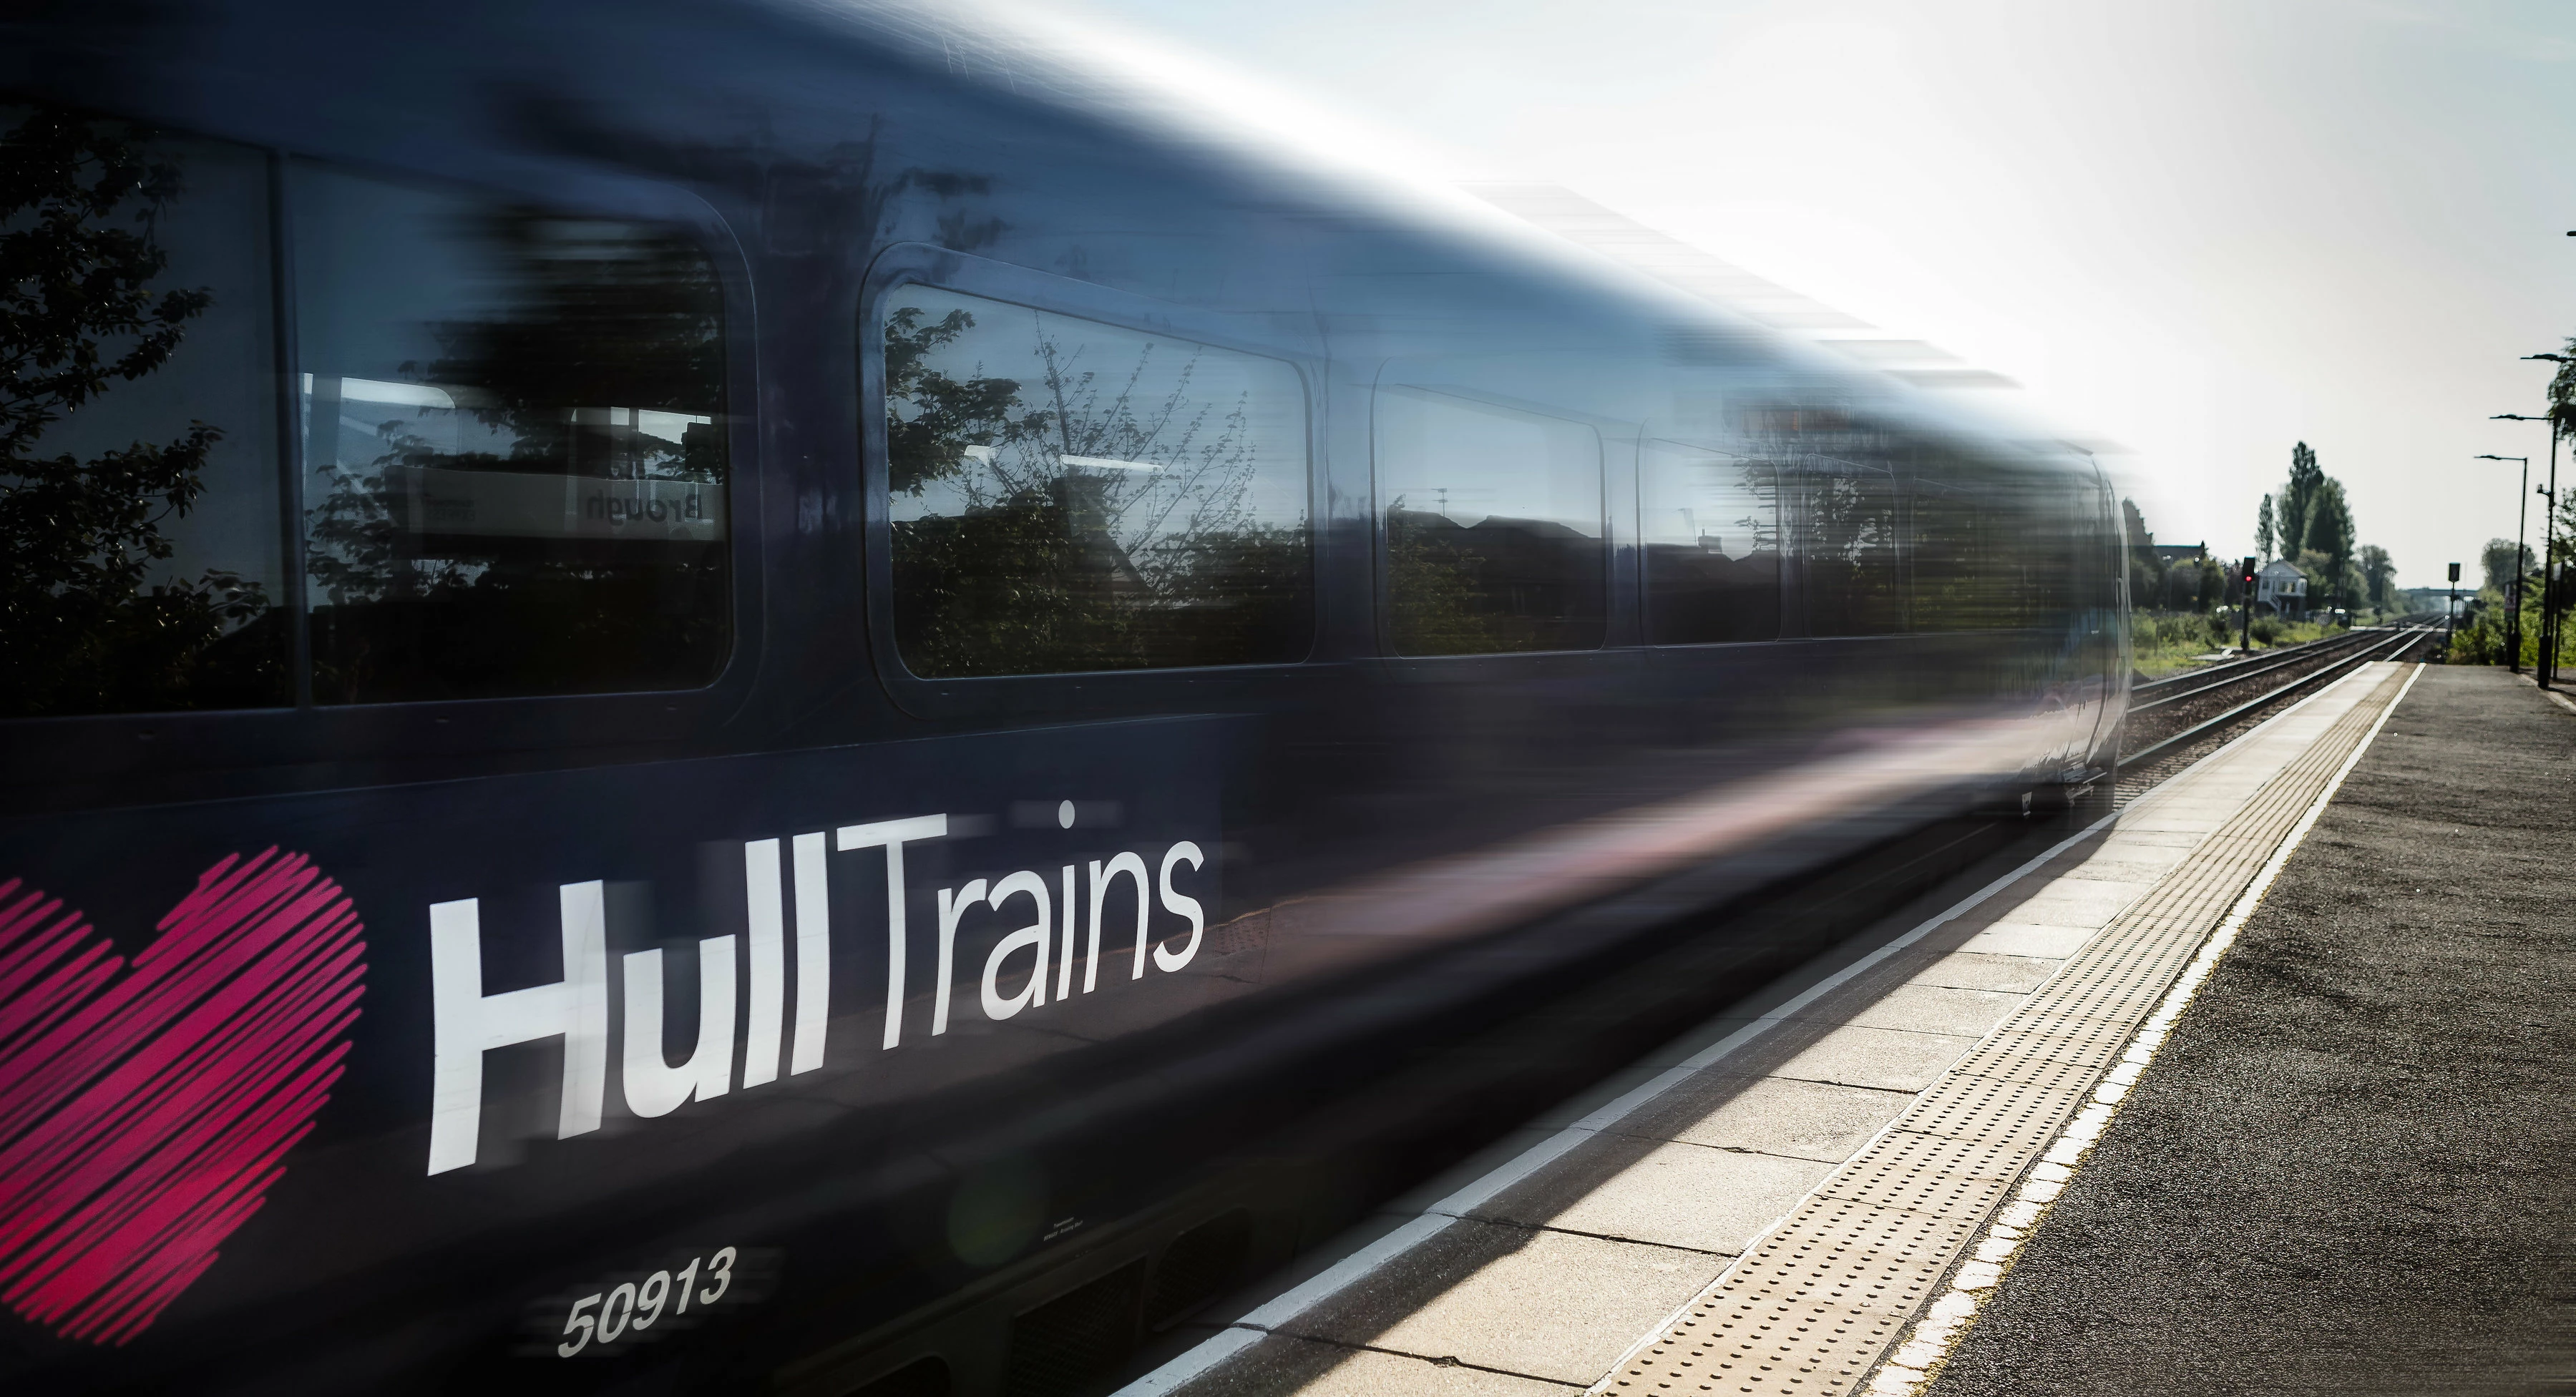 95% of Hull Trains’ services ran as scheduled from June 24 to July 20